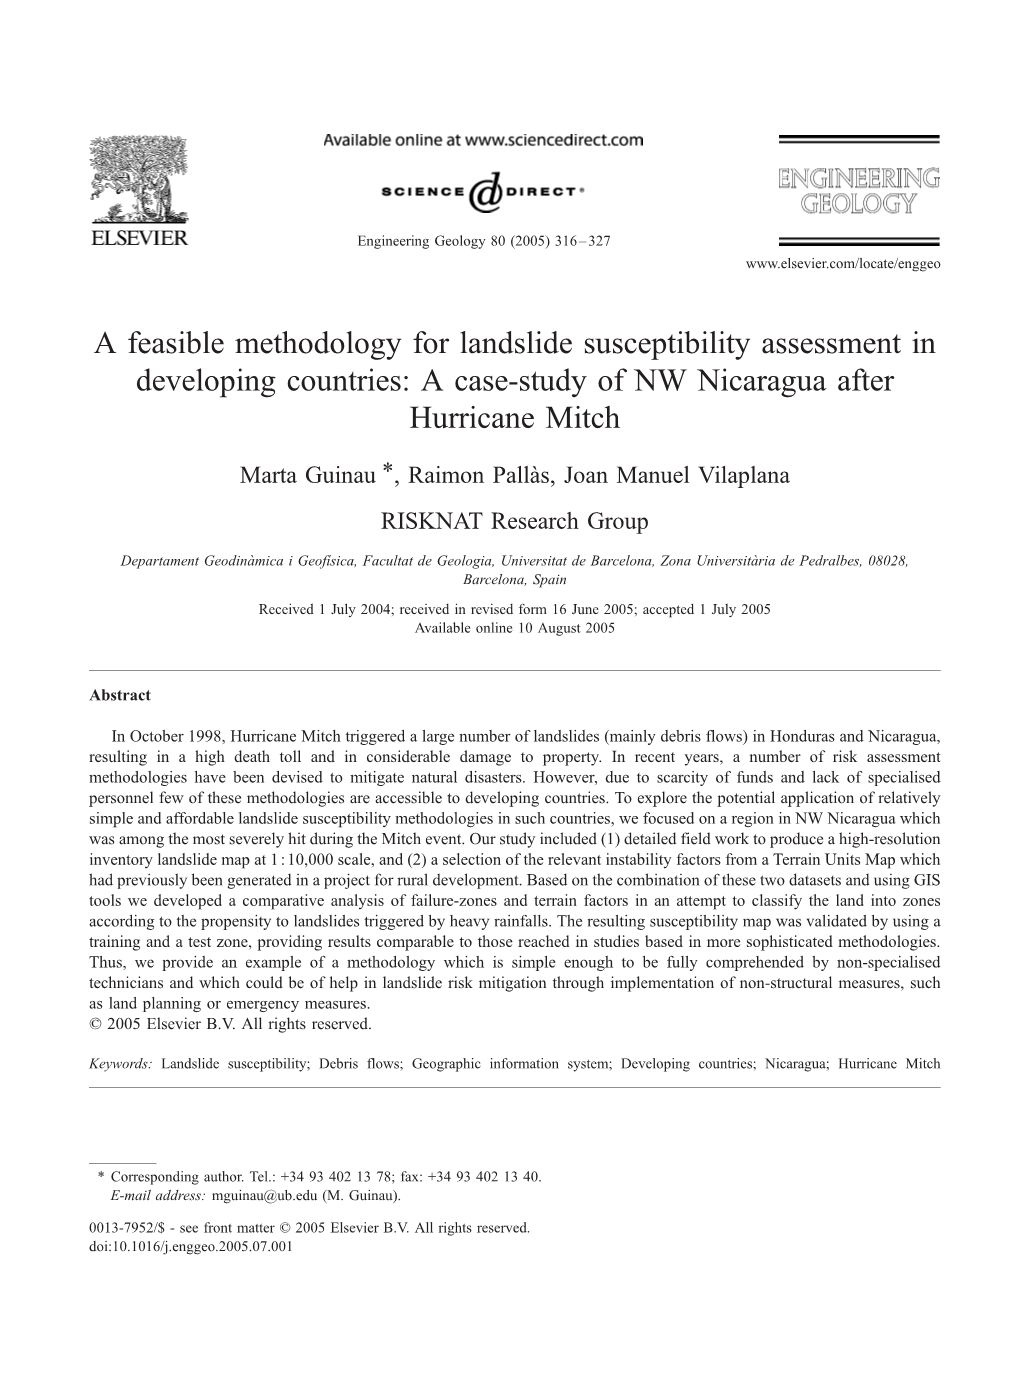 A Feasible Methodology for Landslide Susceptibility Assessment in Developing Countries: a Case-Study of NW Nicaragua After Hurricane Mitch